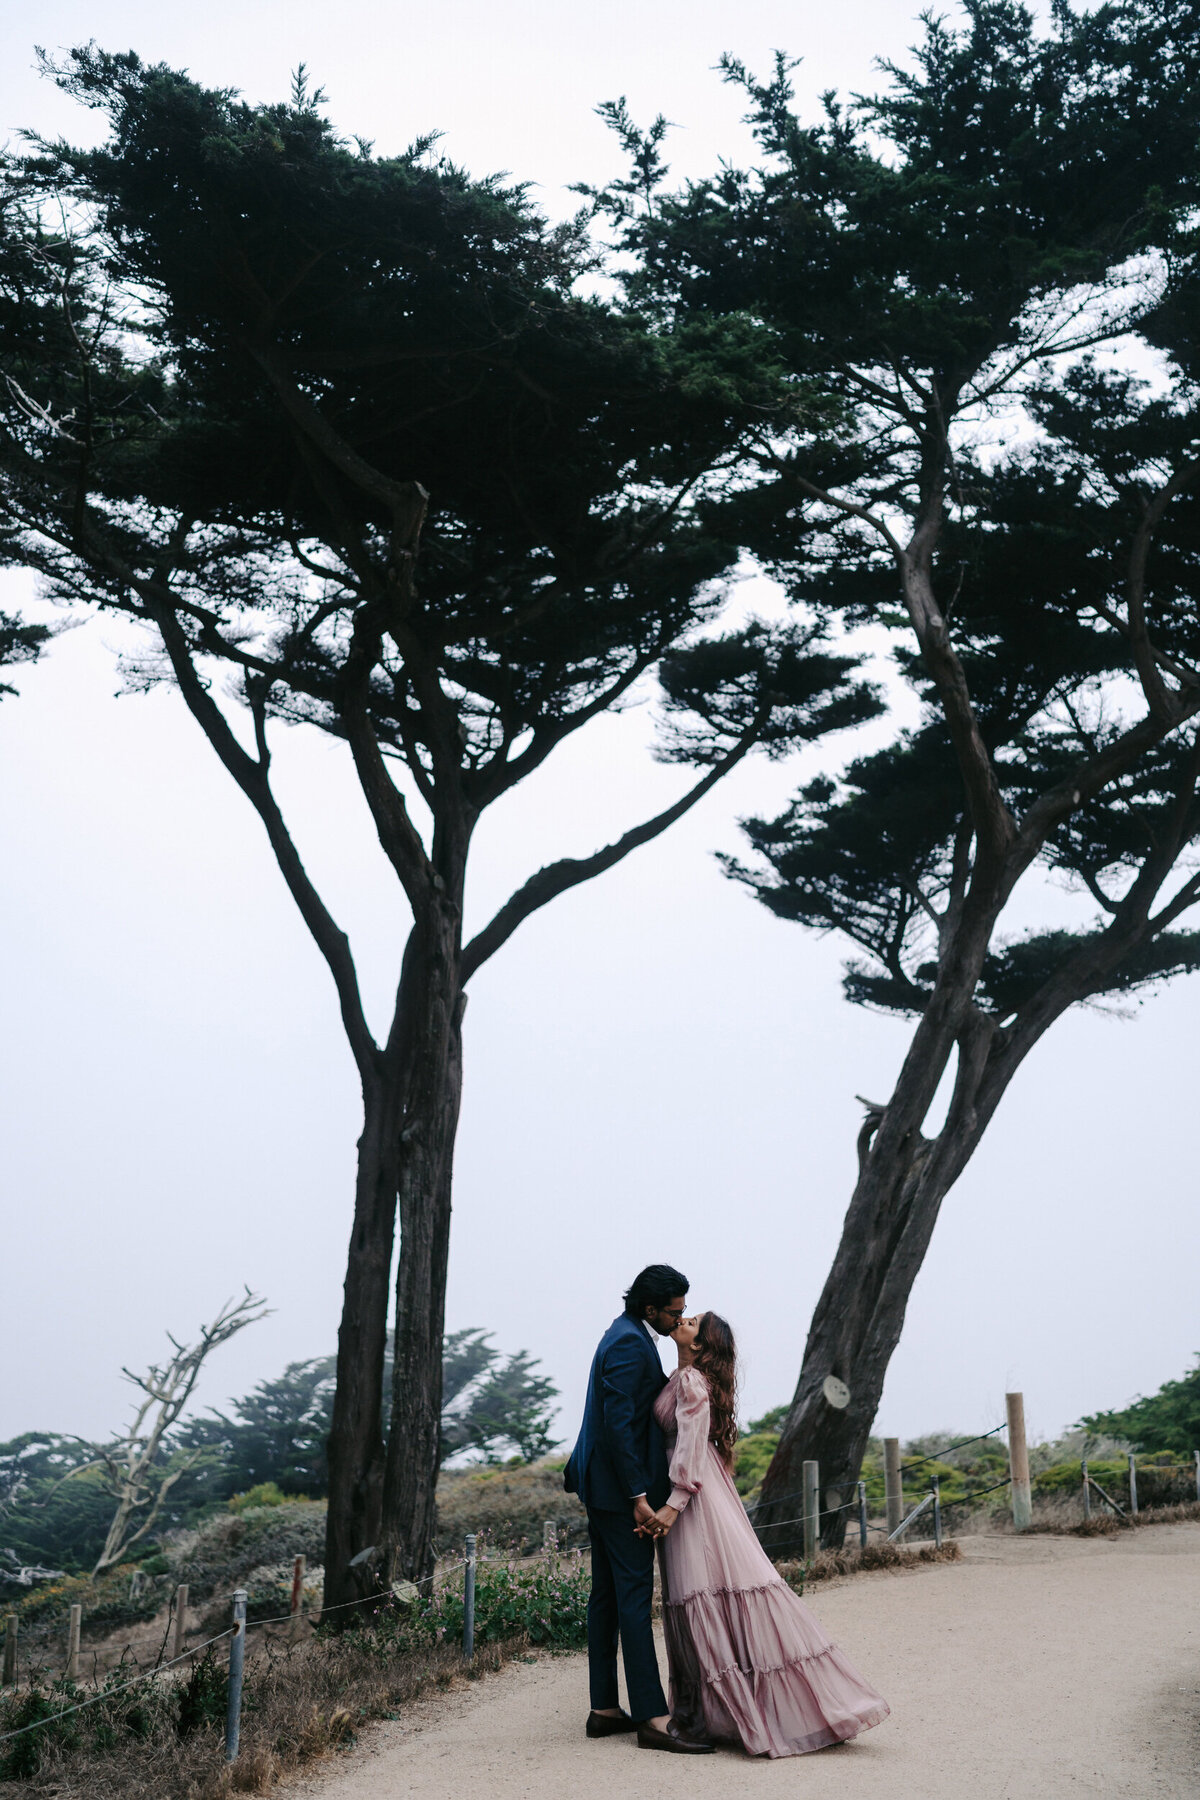 A photograph in color of Heera and Nithin during their engagement portrait session at Sutro Baths in San Francisco, California. The full length photograph shows the couple standing between two tall beach cypress trees in the midst of fog. He is wearing a blue suit and she is wearing a long sleeved, flowing, floor-length purple dress. They are facing each other, holding hands at their sides and kissing. Wedding photography taken by Stacie McChesney/Vitae Weddings.